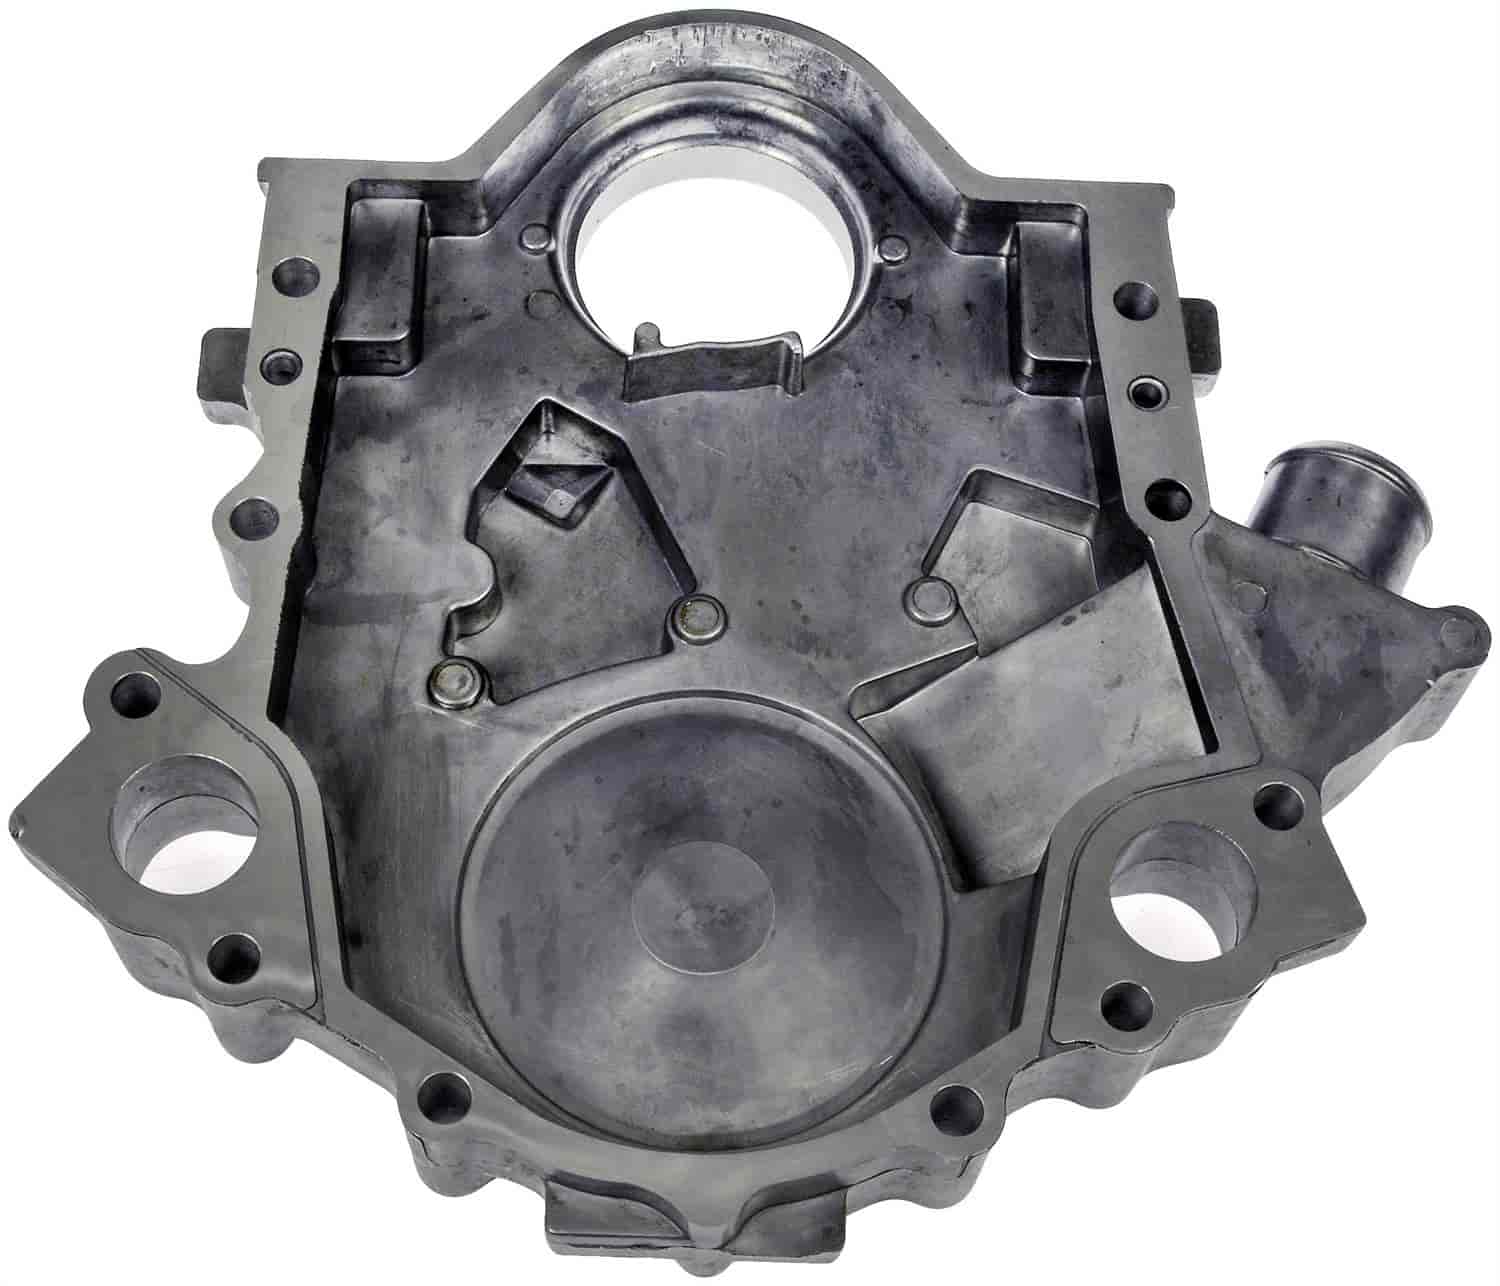 Timing Cover Kit for 1990-2008 Ford 3.0L, 1990-2005 Mercury 3.0L